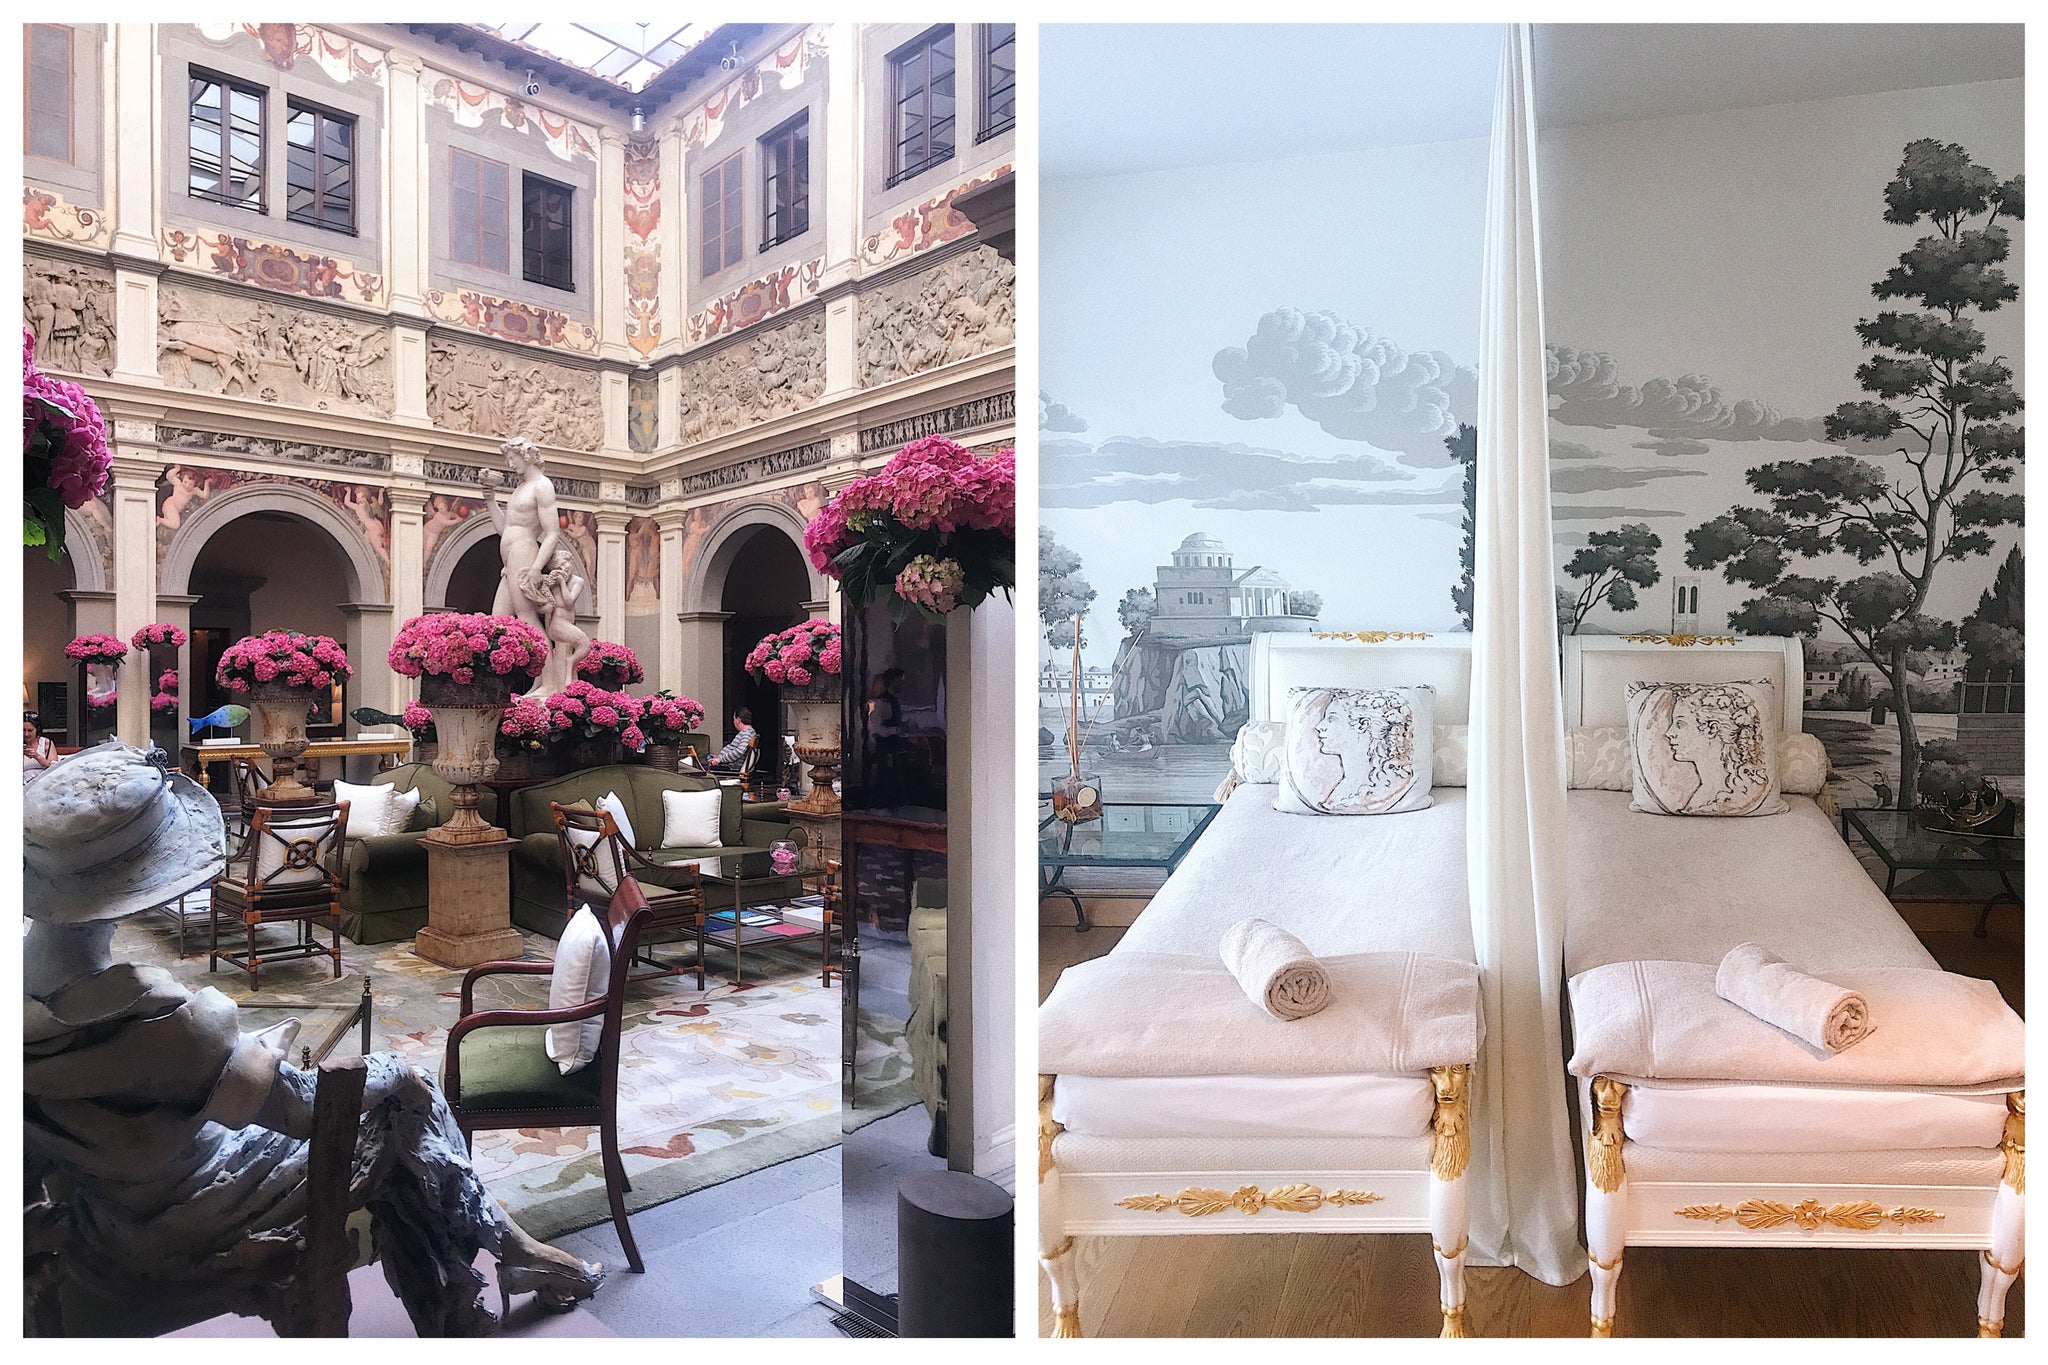 Four Season Hotel, Florence Italy Katie Dean travel guide